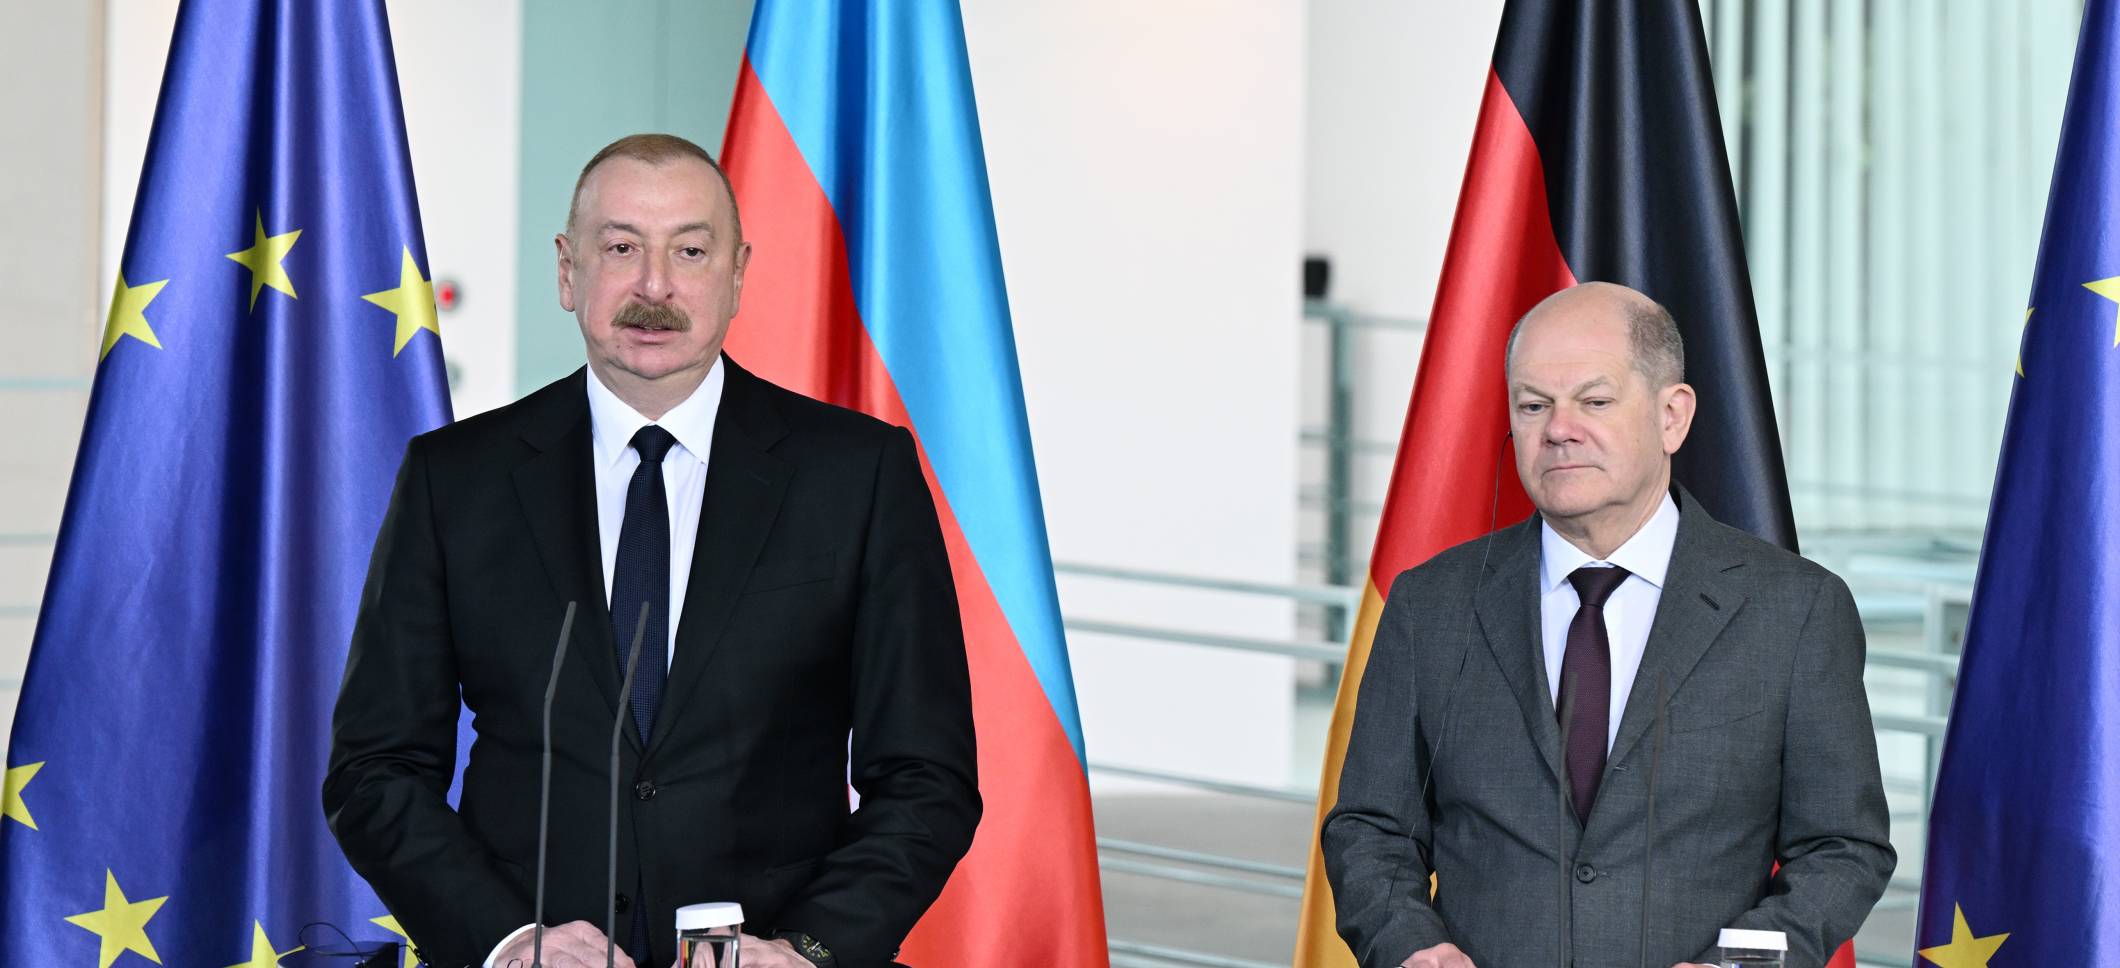 Ilham Aliyev and Chancellor of Germany Olaf Scholz are making press statements